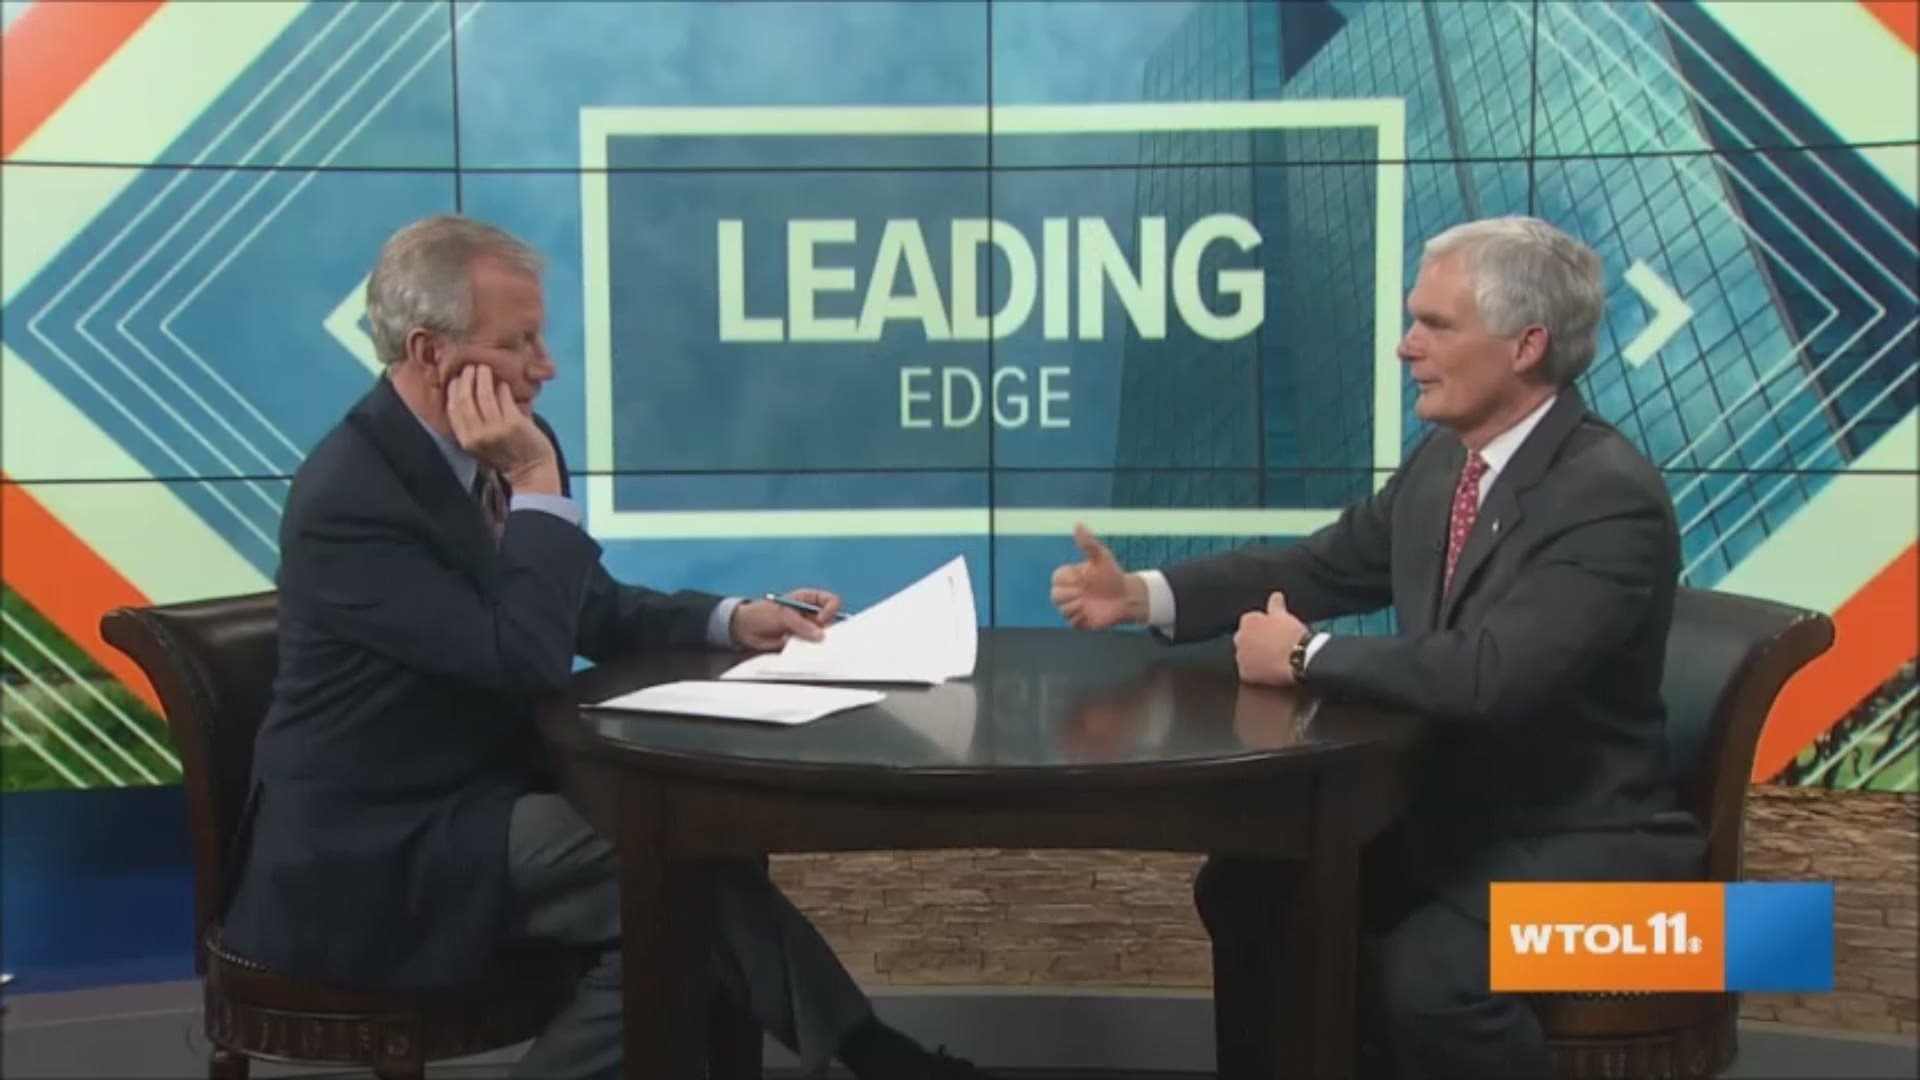 U.S. Rep. Bob Latta, R-OH, sits with Jerry Anderson and discusses the impeachment inquiry, Russia probe, healthcare, robocalls and internet connectivity.